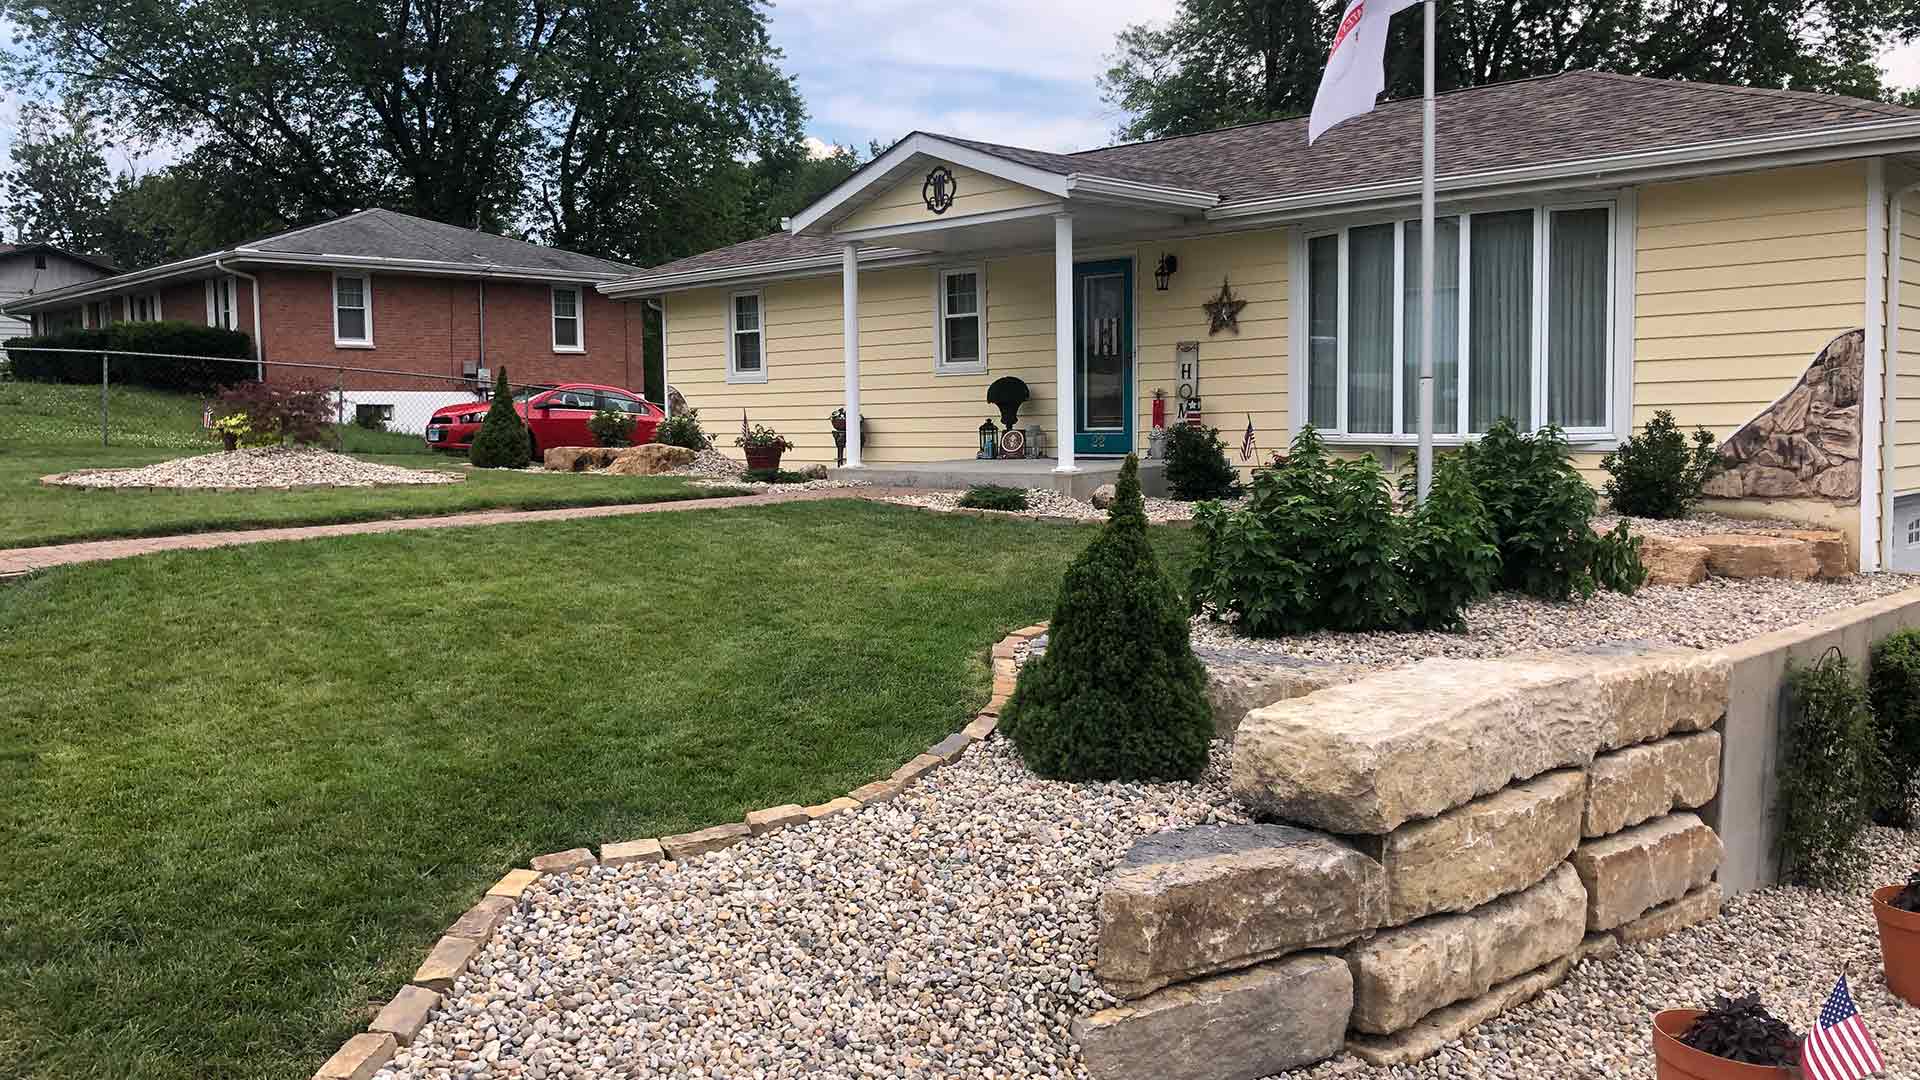 A Bethalto, IL home with a front yard landscaping makeover.